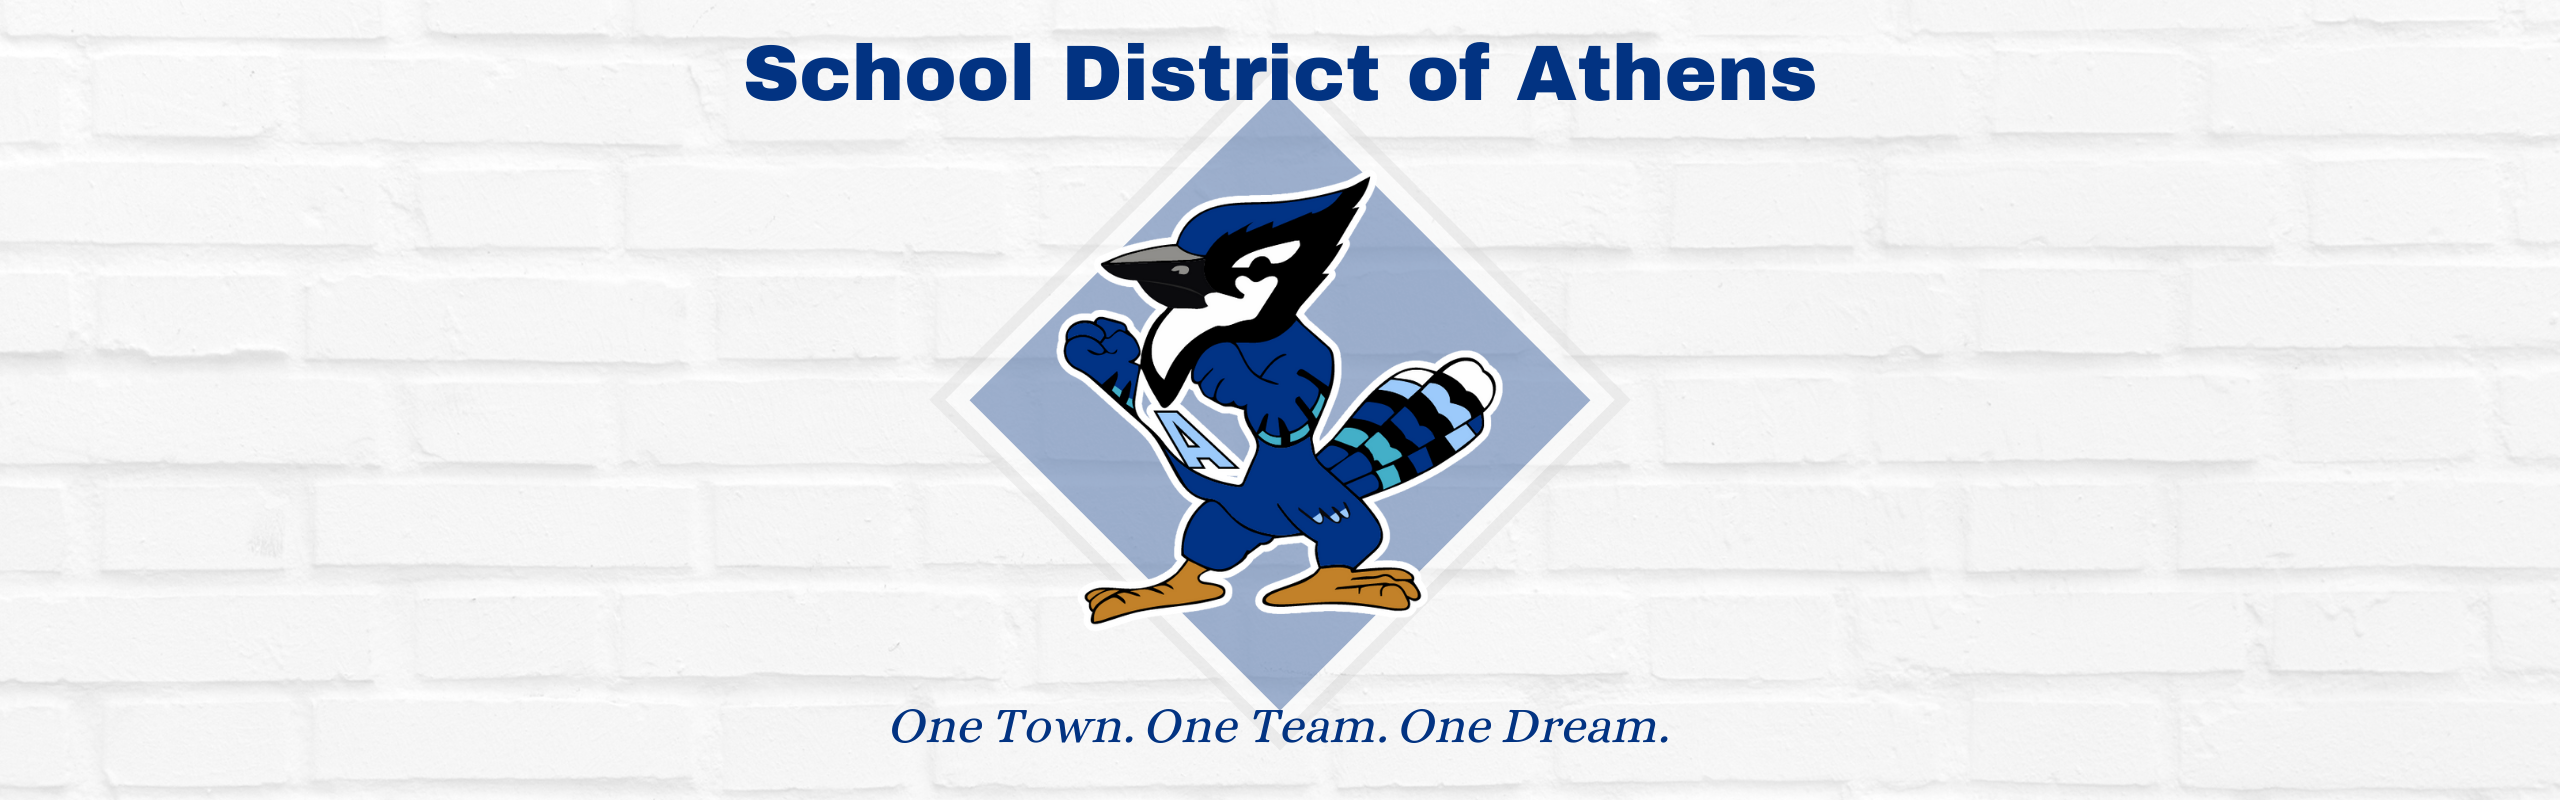 Athens School District - Better Together